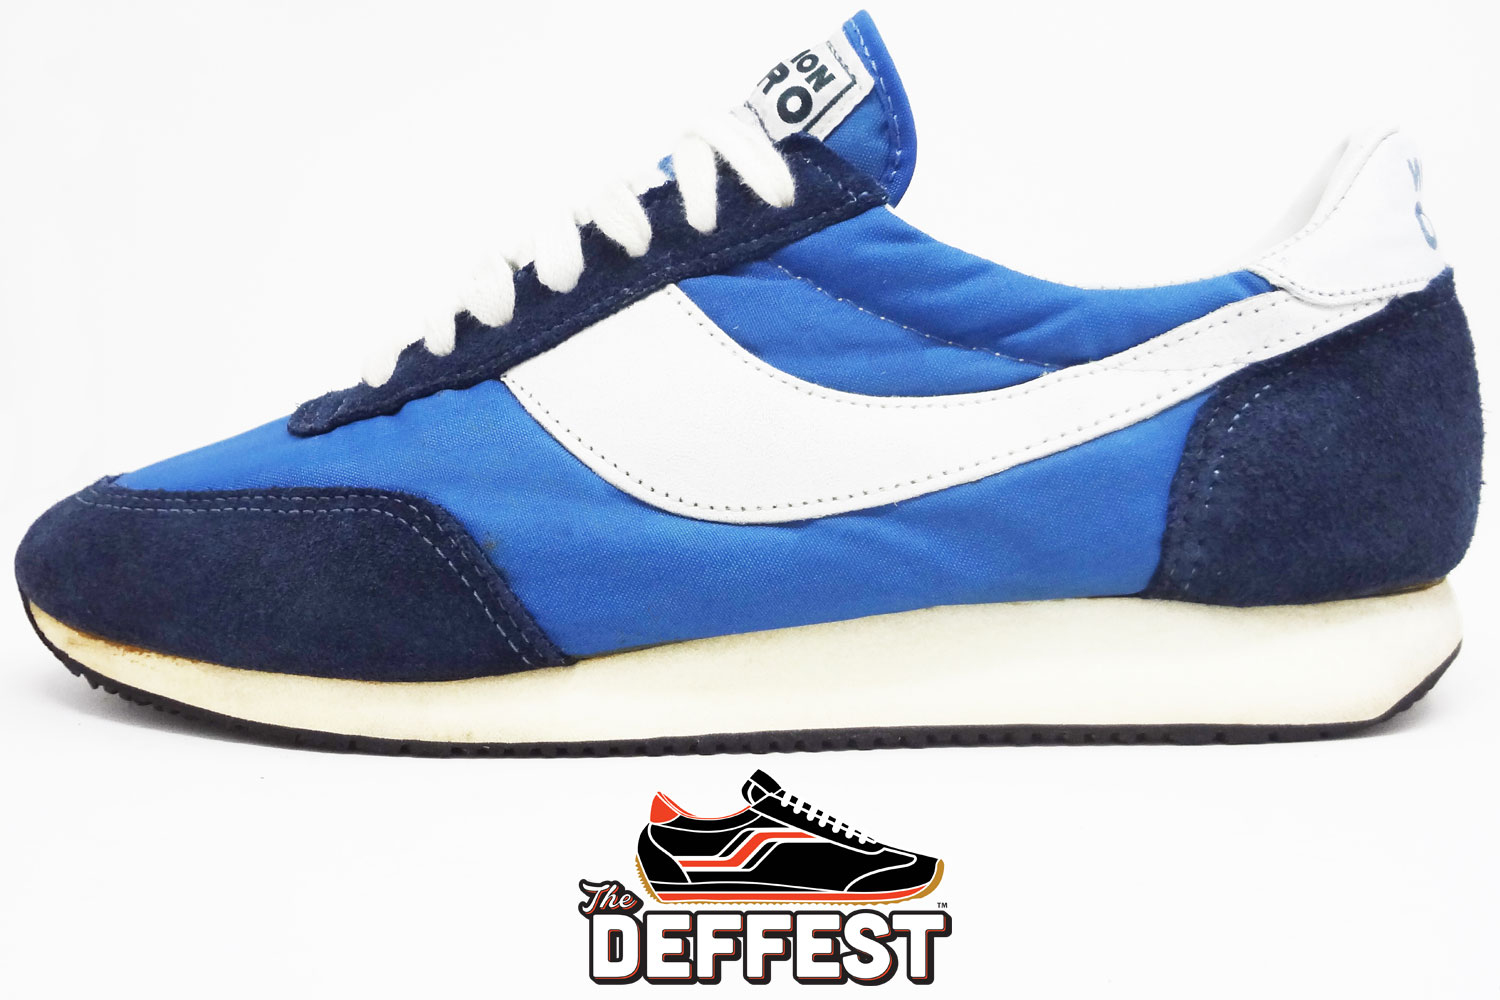 The Deffest®. A vintage and retro sneaker Action Pro 80s vintage sneakers